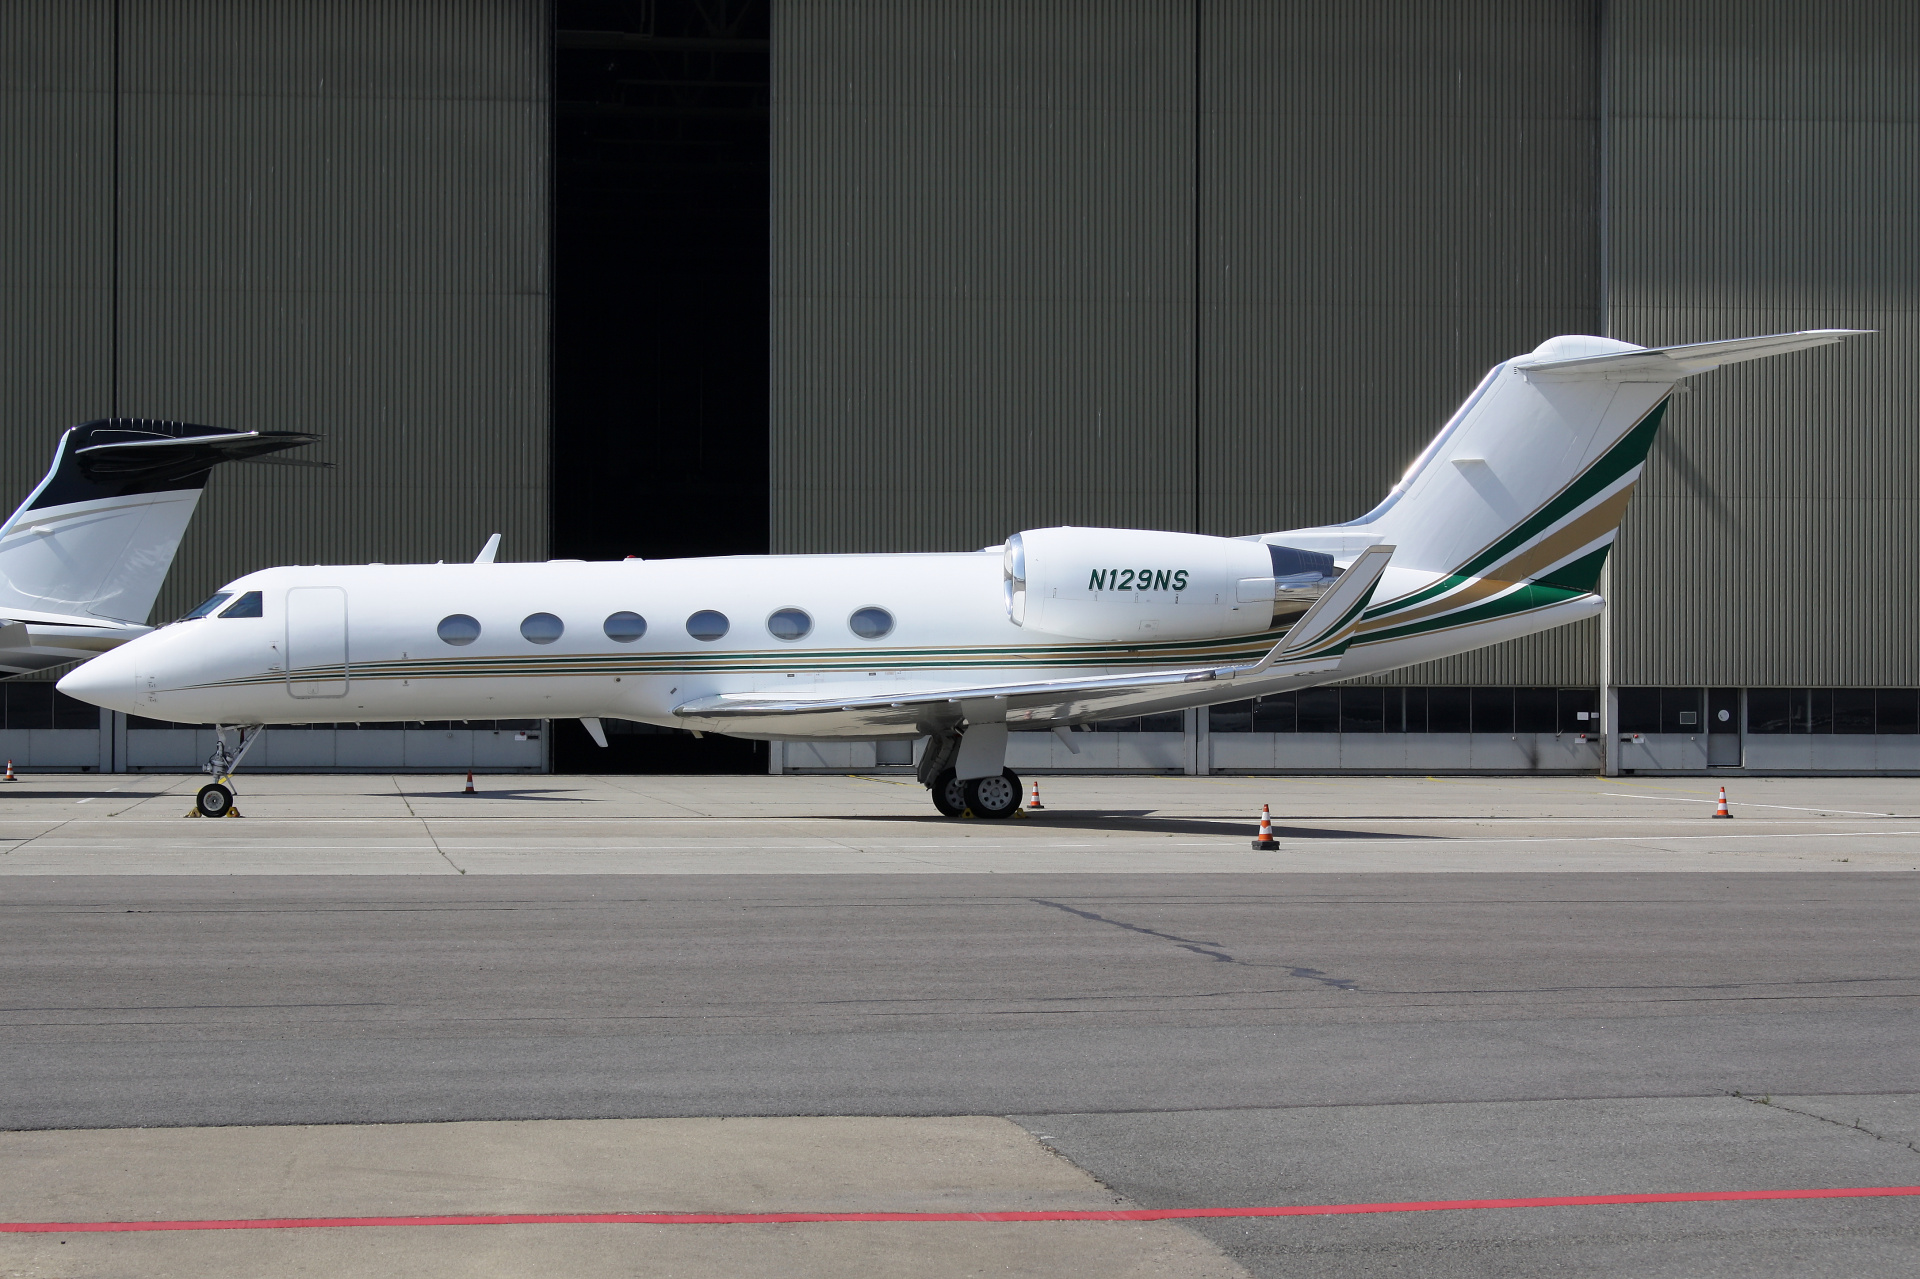 SP, N129NS, Global Air Charters (Samoloty » Spotting na Schiphol » Gulfstream IV and revisions)